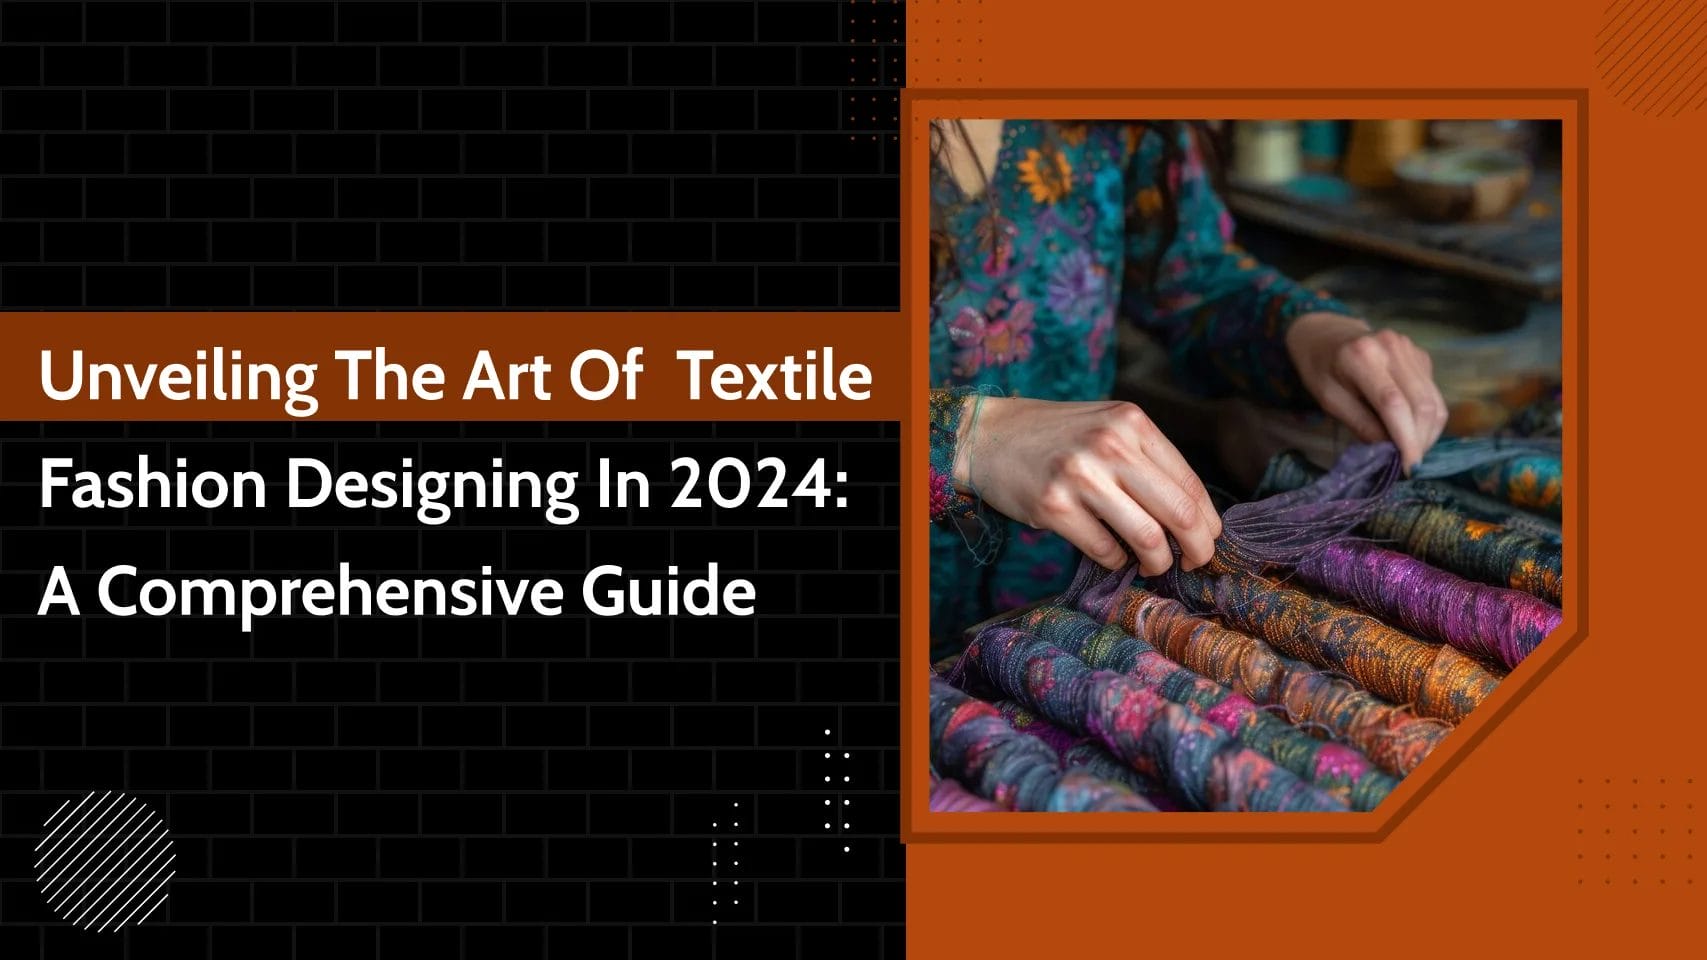 Unveiling the Art of Textile Fashion Designing in 2024: A Comprehensive Guide